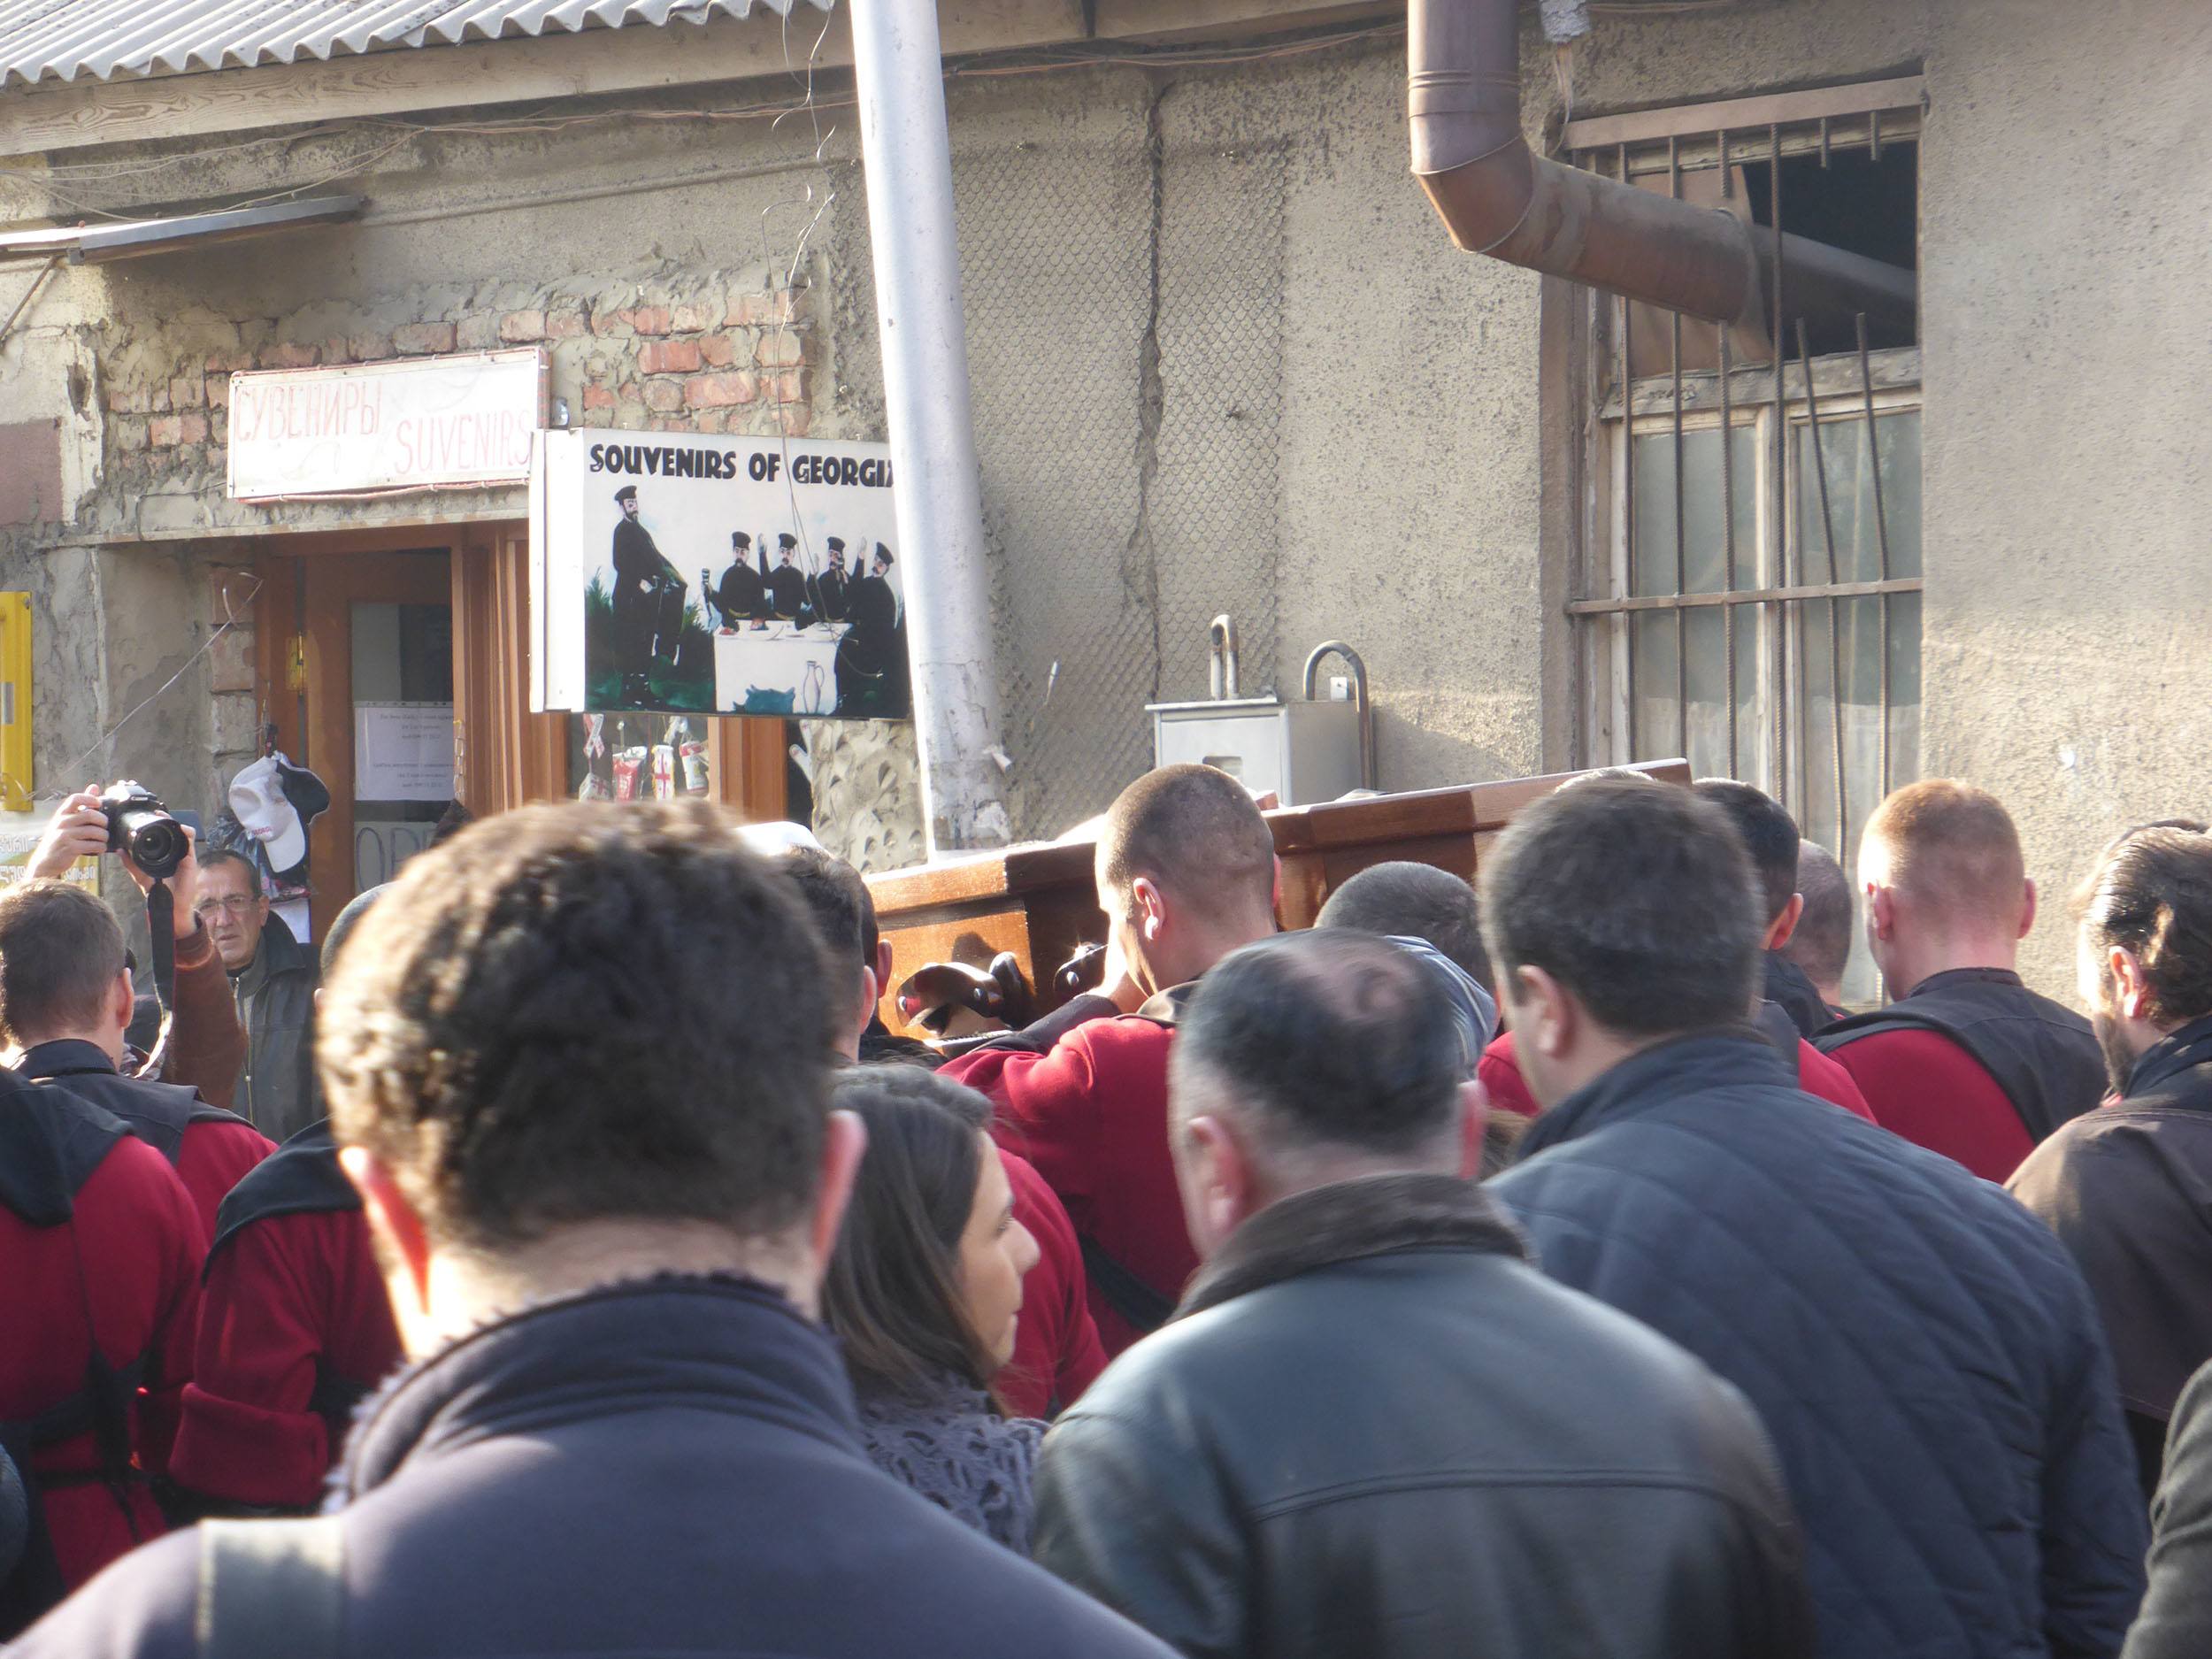 Georgians following a funeral procession with open coffin through the streets of Tbilisi Georgia